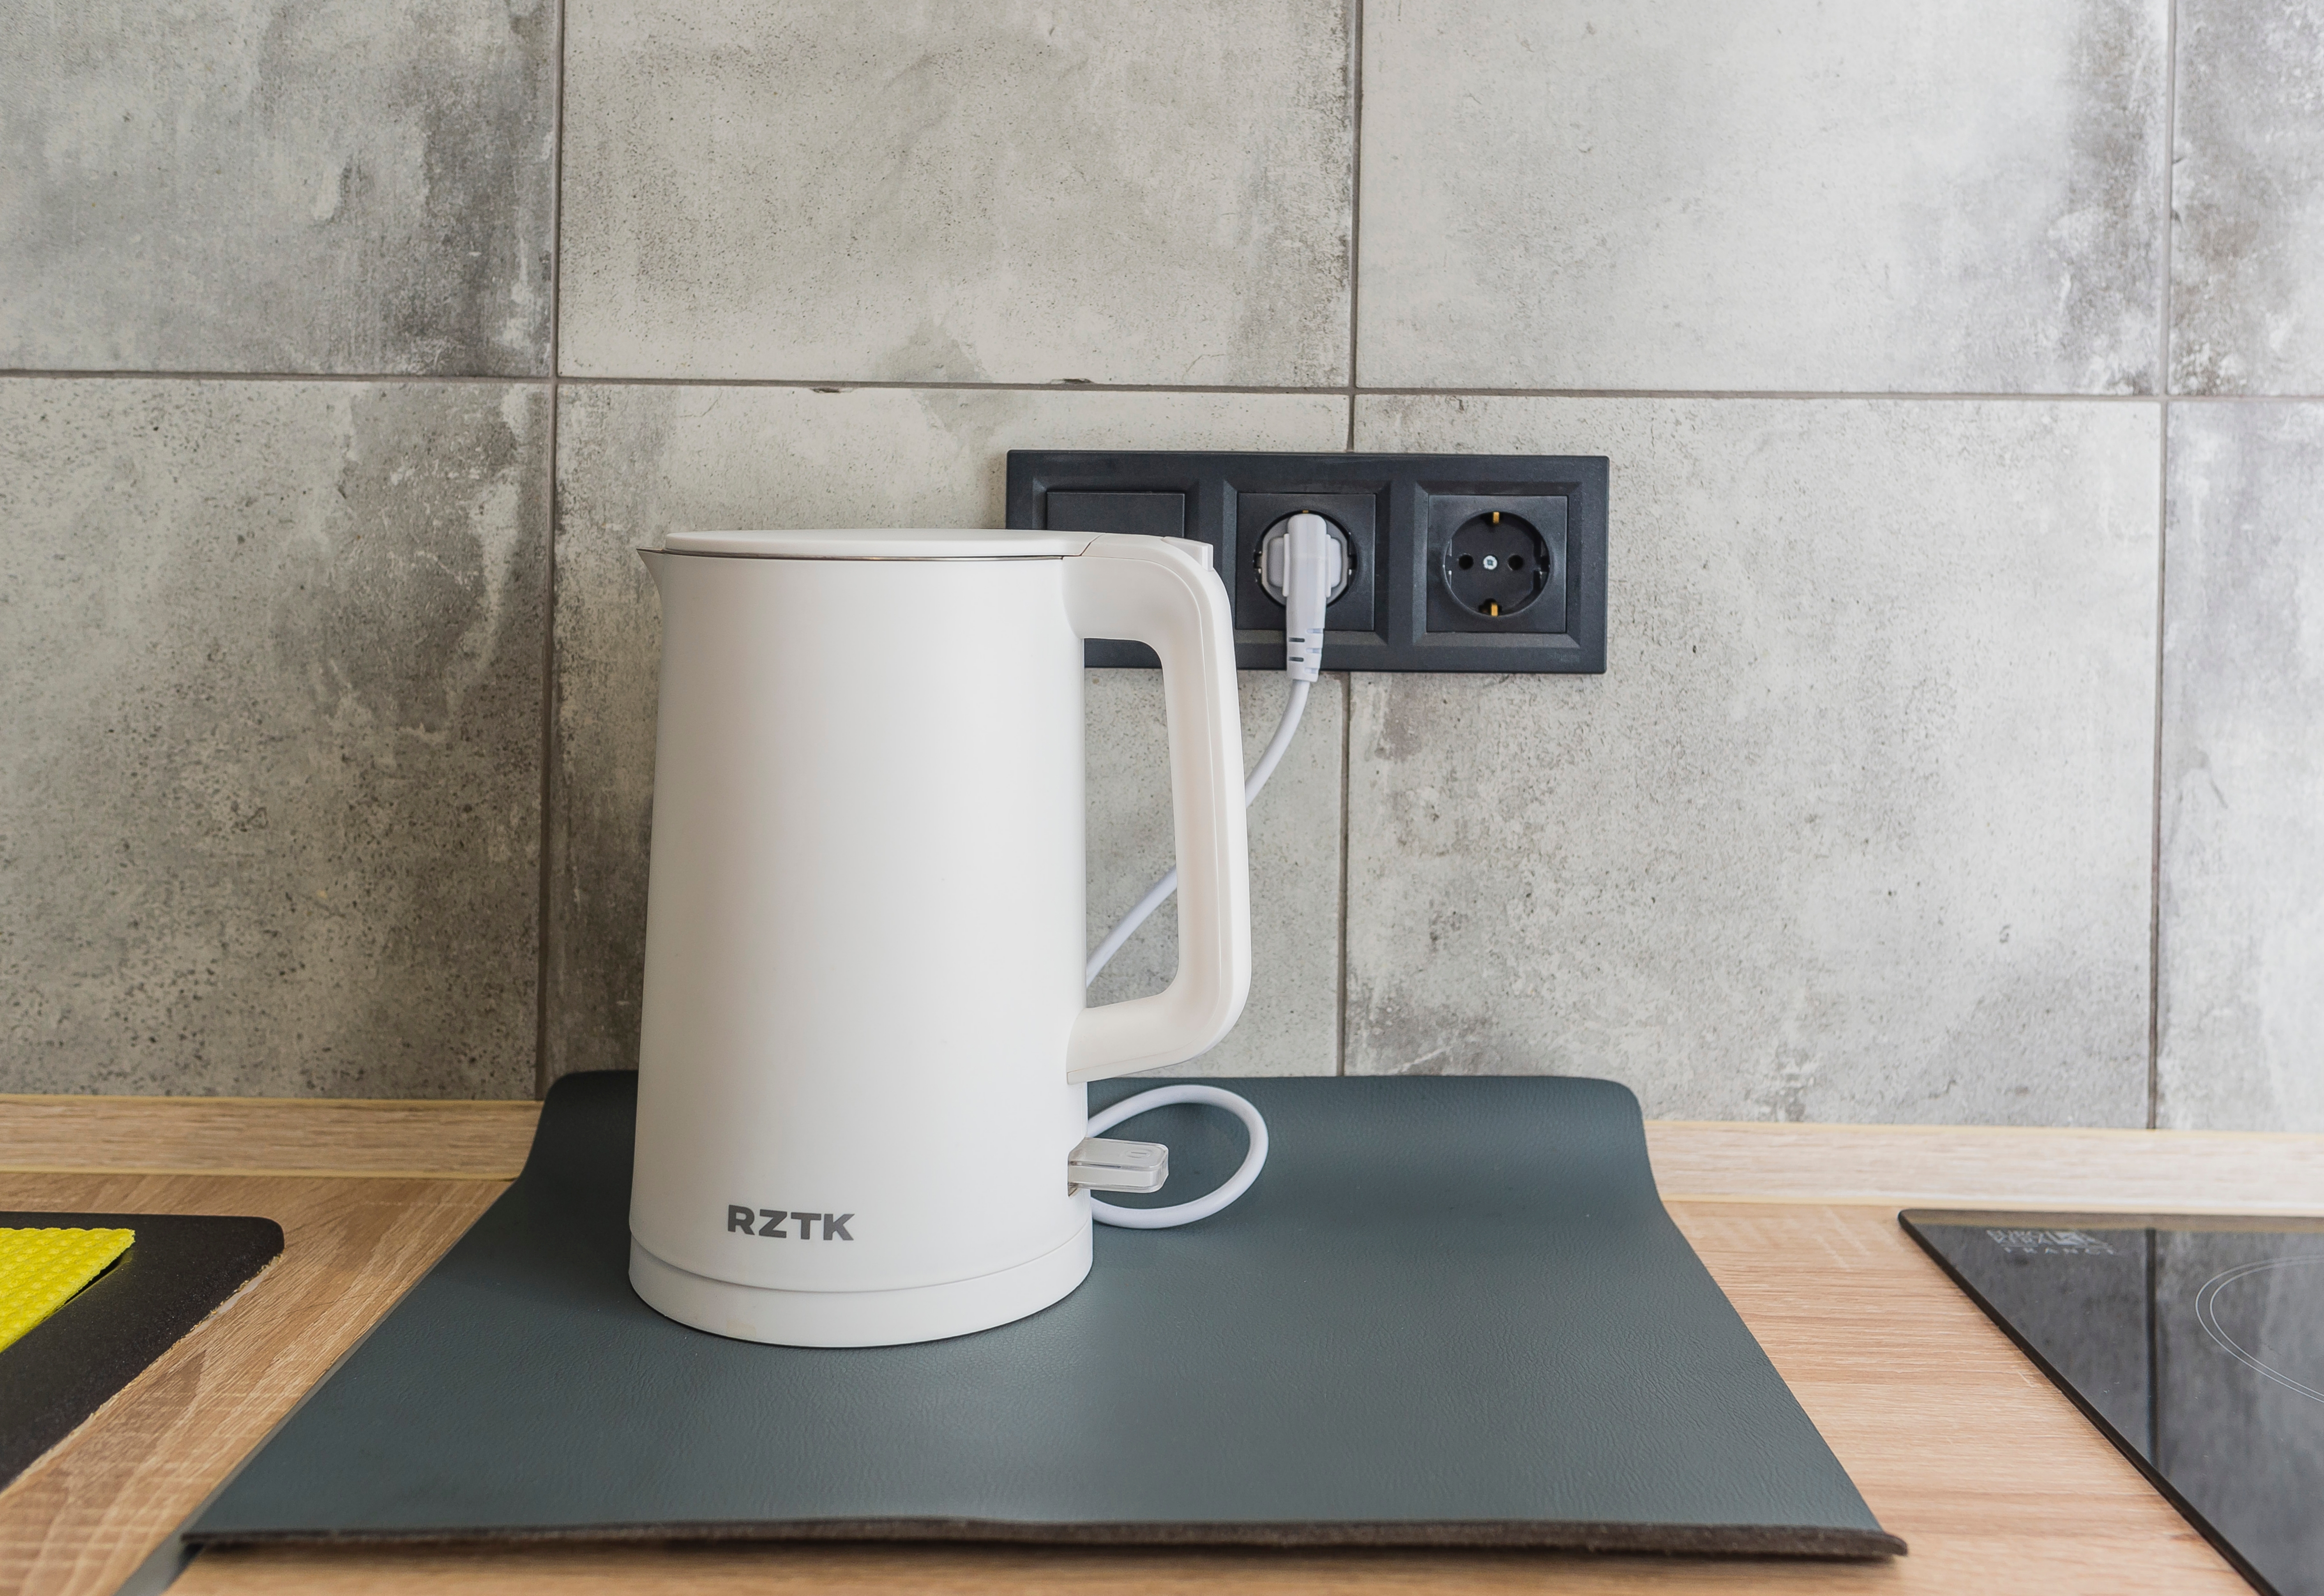 A white electric kettle standing plugged into a socket | Source: Shutterstock